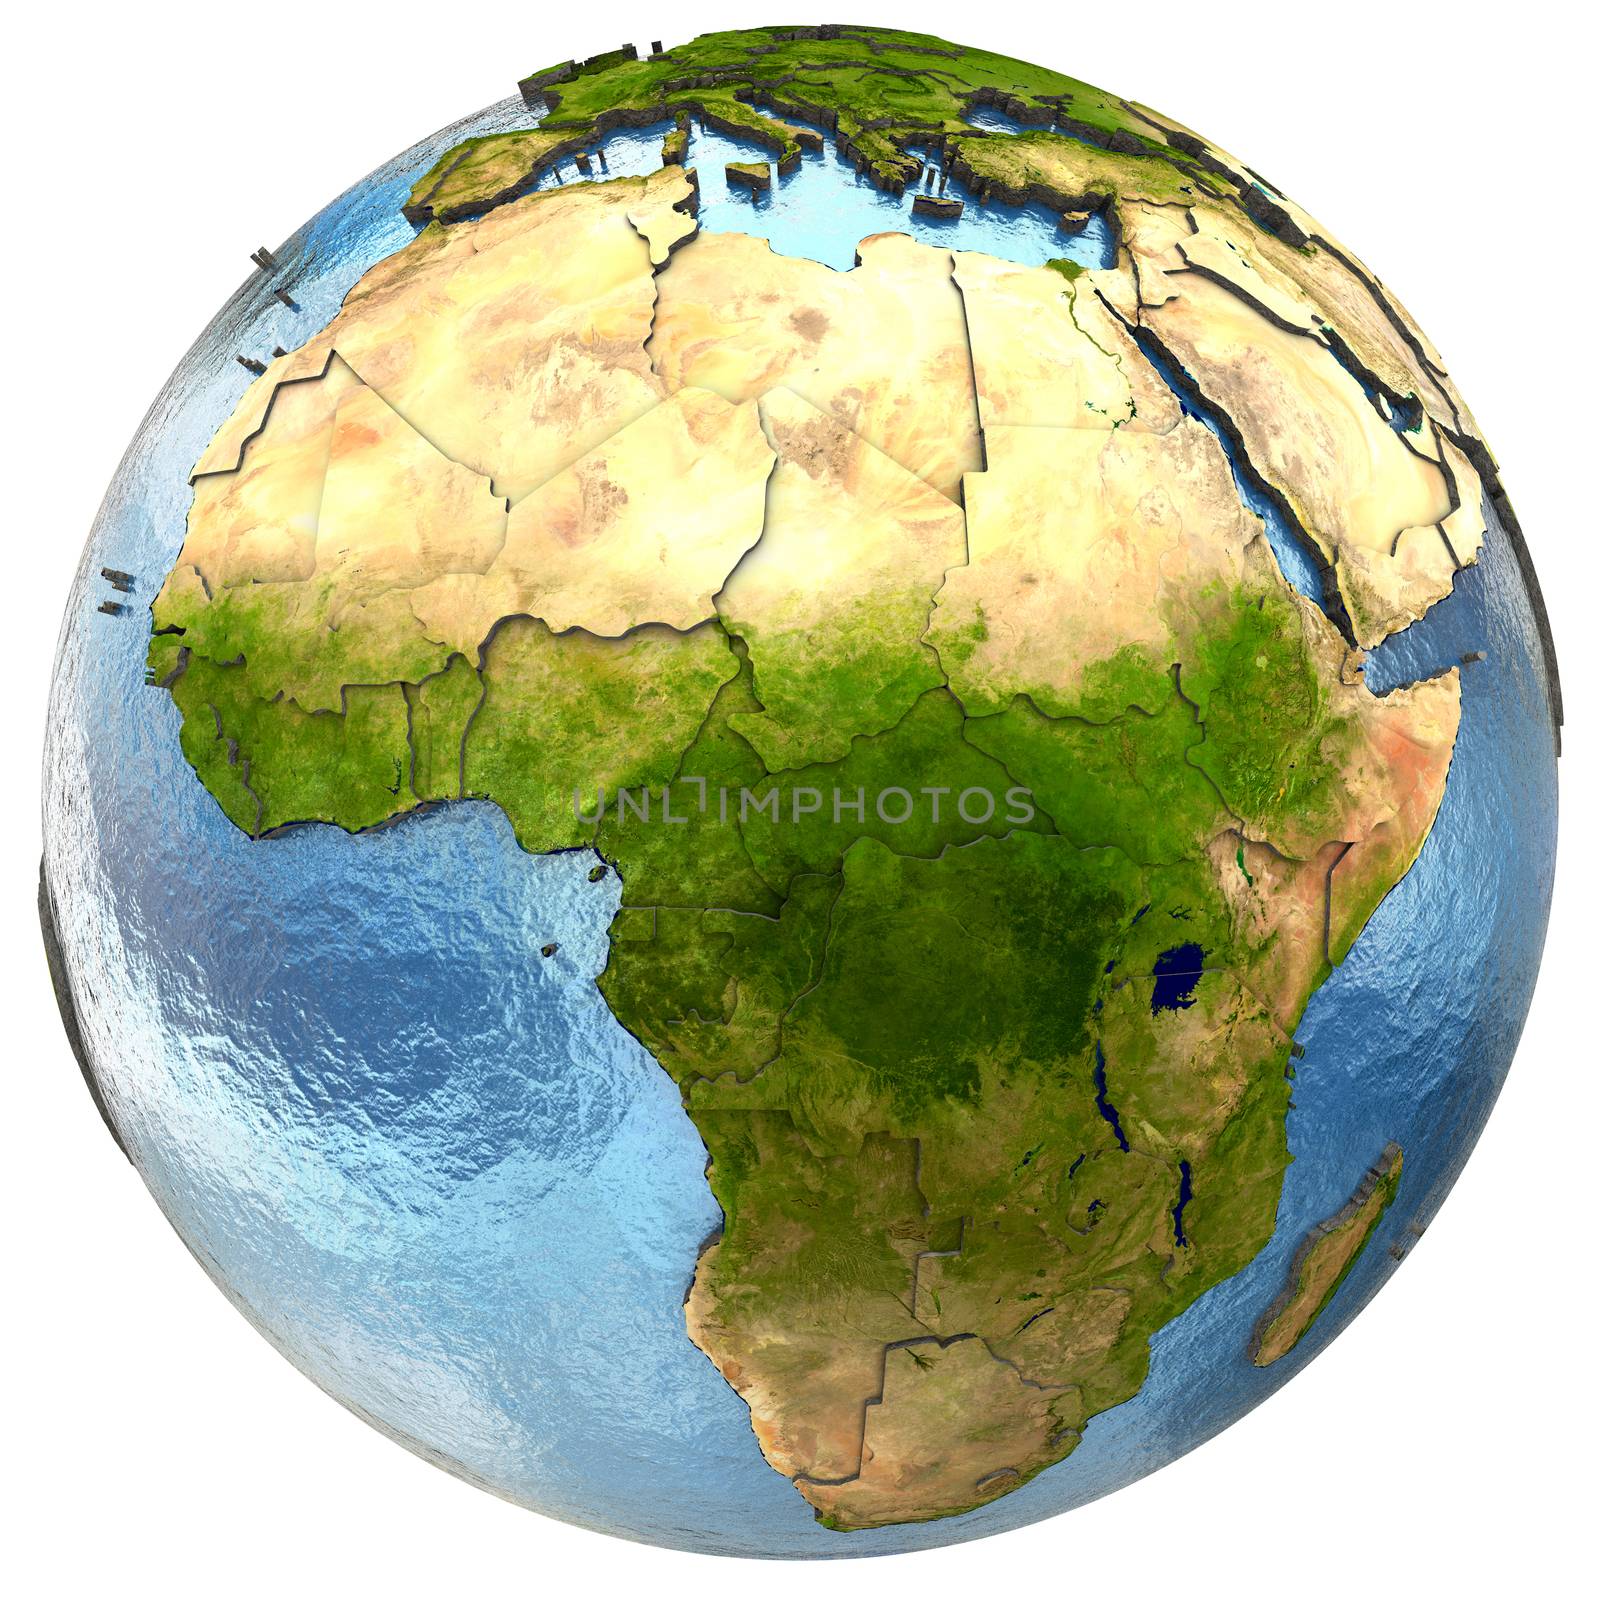 Africa on Earth by Harvepino